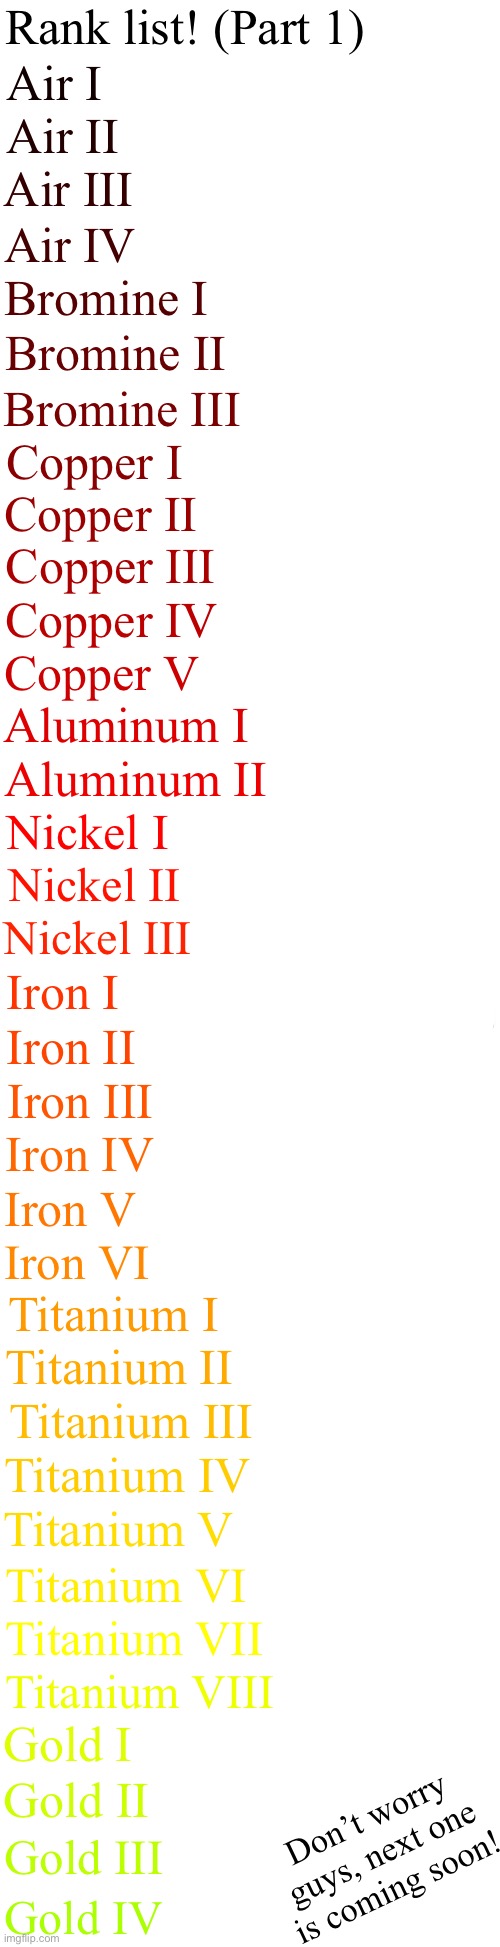 Image Title | Rank list! (Part 1); Air I; Air II; Air III; Air IV; Bromine I; Bromine II; Bromine III; Copper I; Copper II; Copper III; Copper IV; Copper V; Aluminum I; Aluminum II; Nickel I; Nickel II; Nickel III; Iron I; Iron II; Iron III; Iron IV; Iron V; Iron VI; Titanium I; Titanium II; Titanium III; Titanium IV; Titanium V; Titanium VI; Titanium VII; Titanium VIII; Gold I; Gold II; Don’t worry guys, next one is coming soon! Gold III; Gold IV | image tagged in long blank white | made w/ Imgflip meme maker